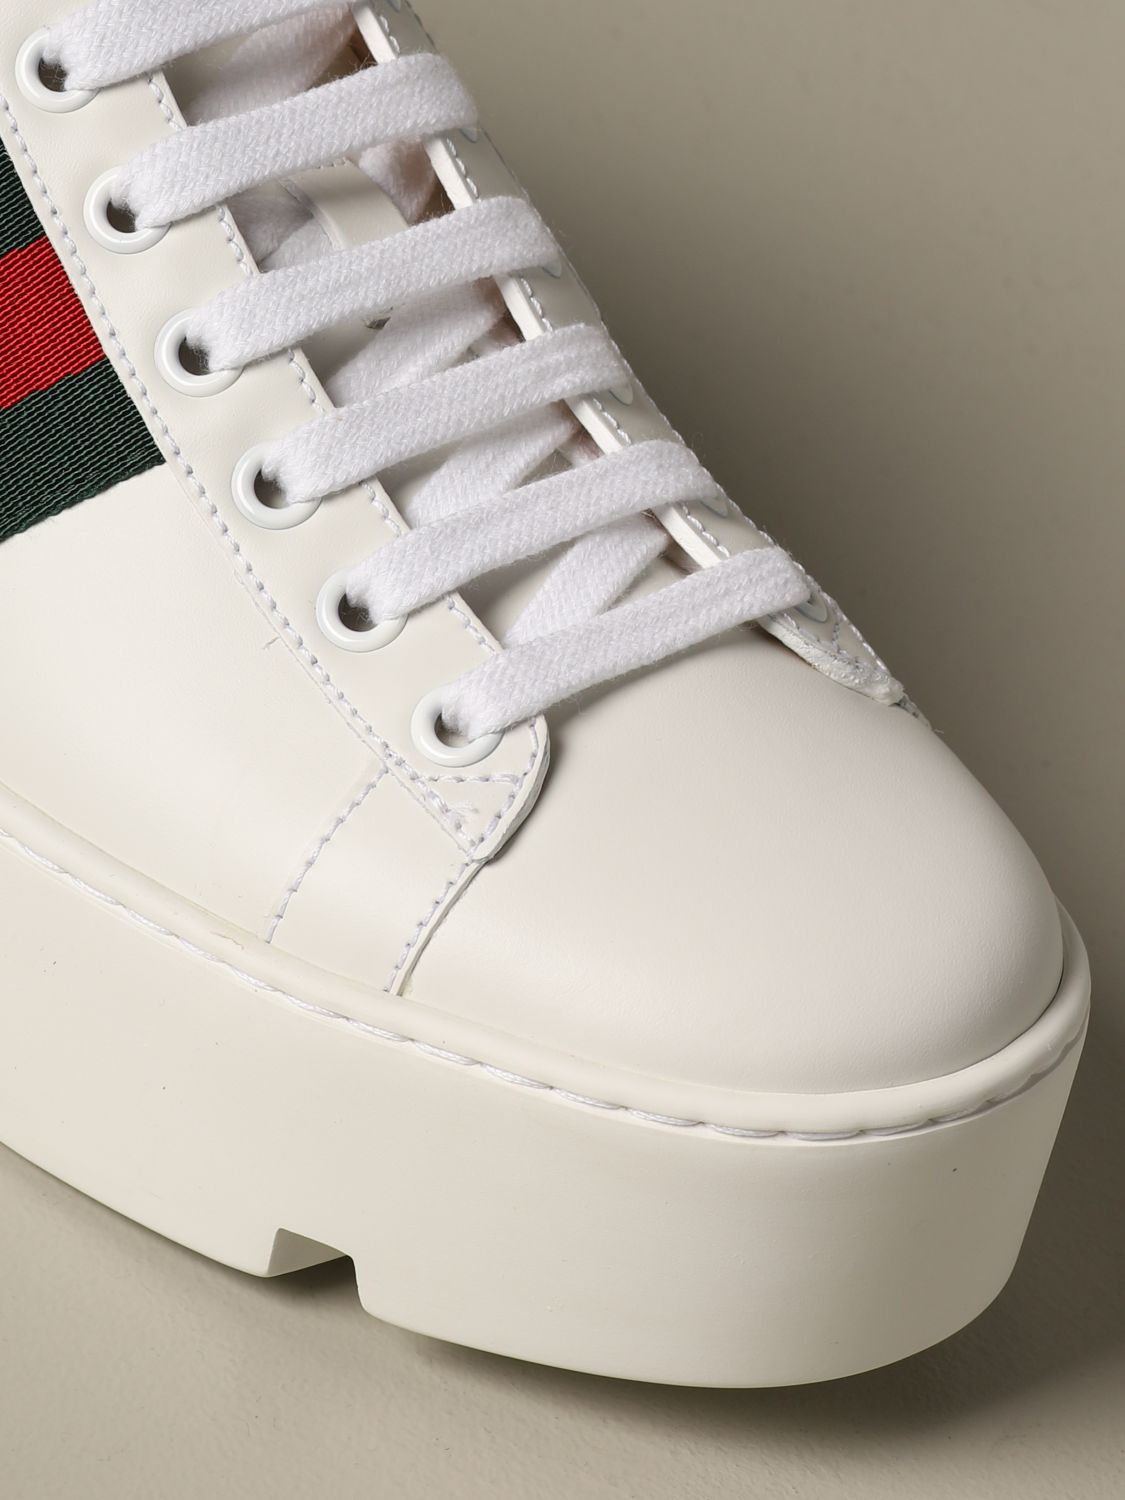 gucci skateboarding shoes